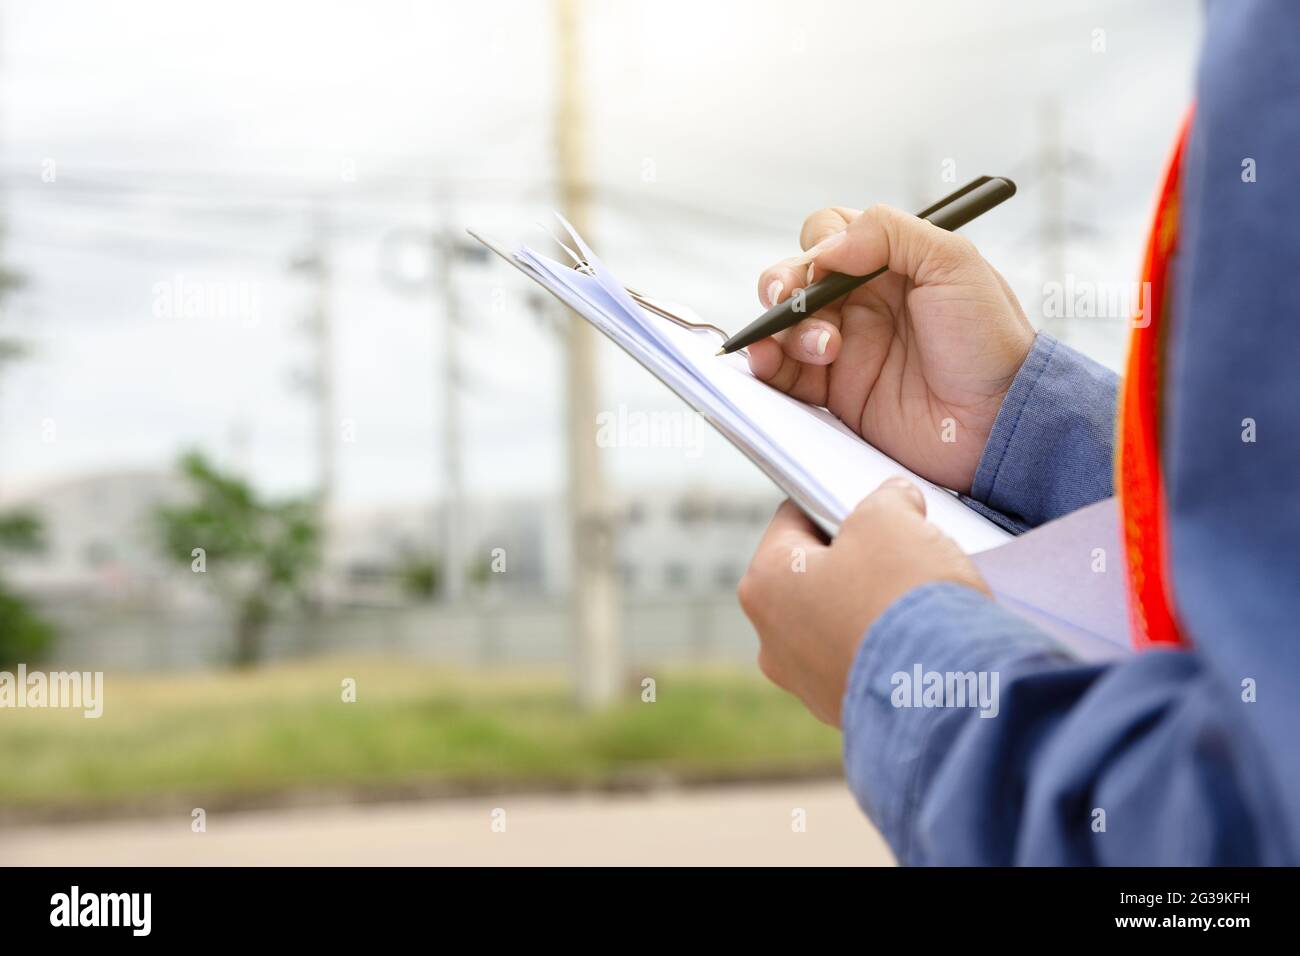 Hand holding clipboard and write on document checklist high voltage system, Working woman Stock Photo